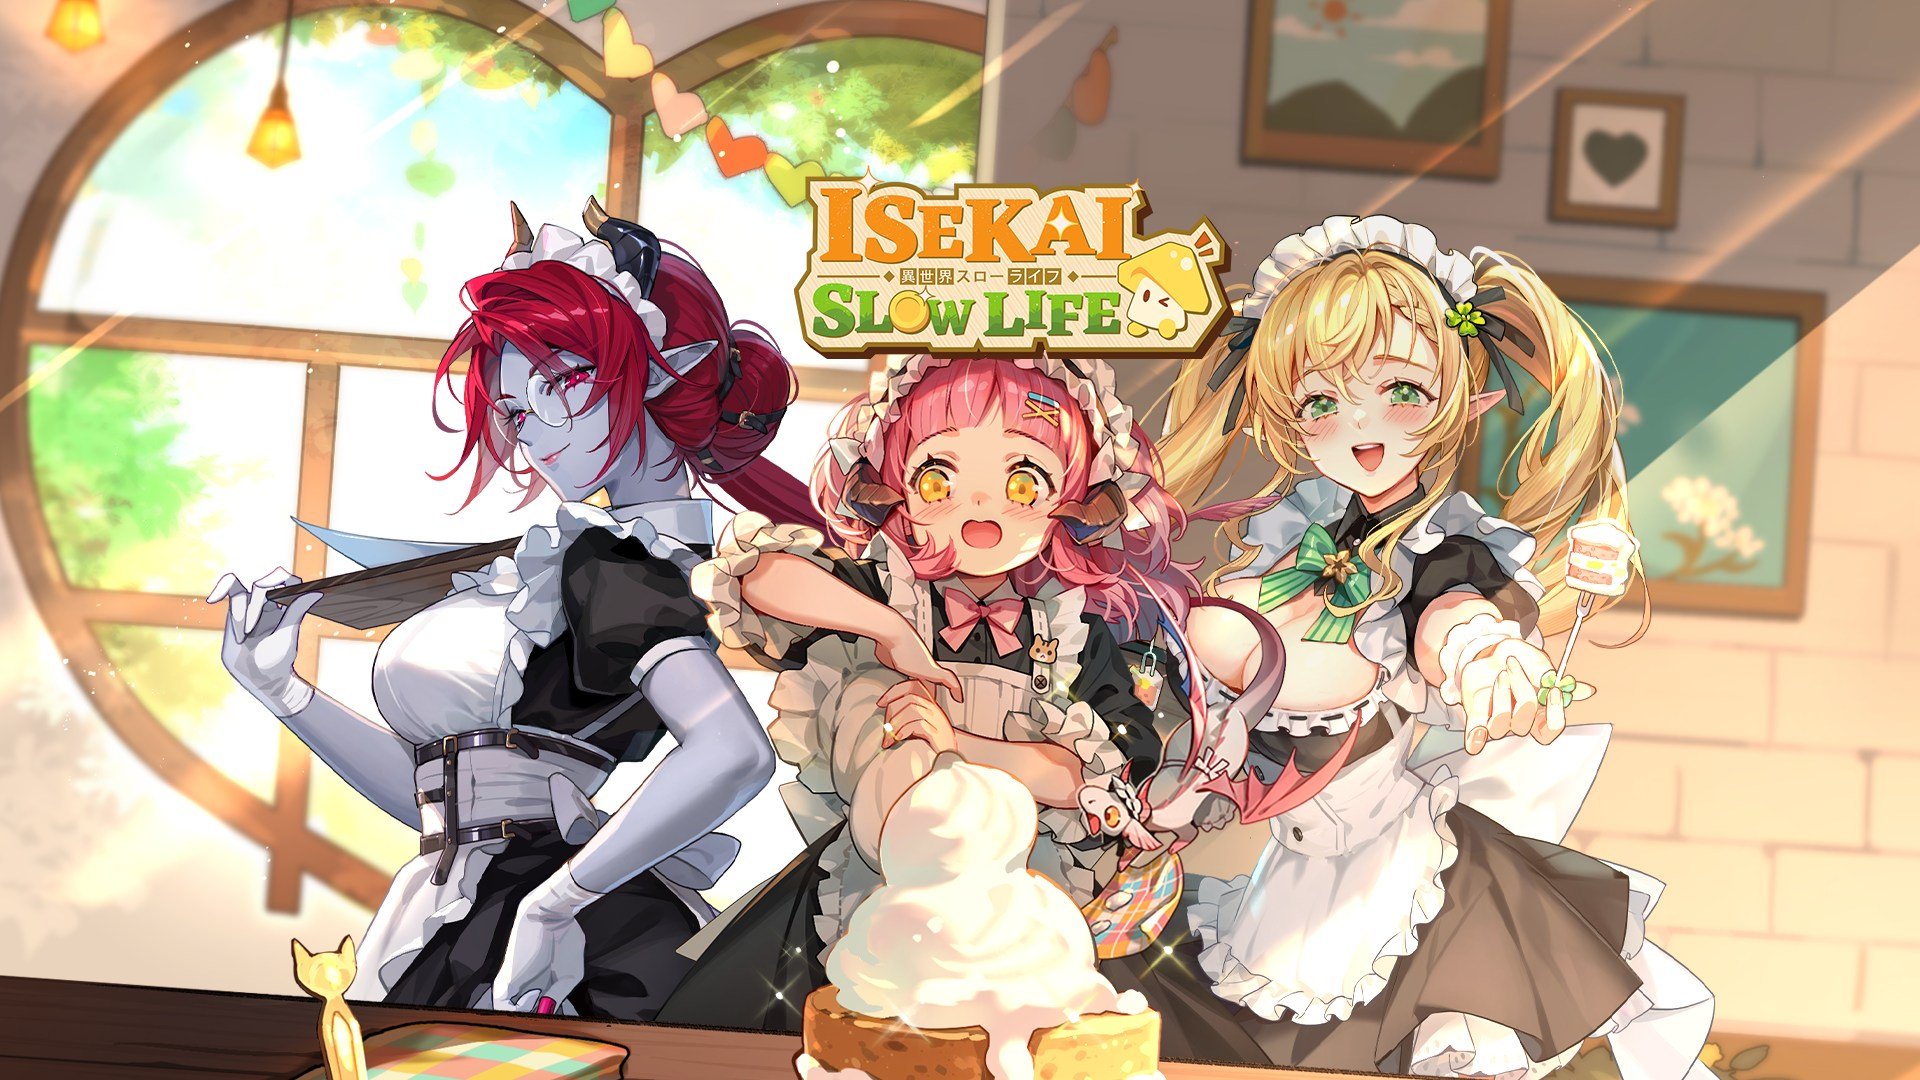 Isekai: Slow Life - New Content Update and Maintenance Details